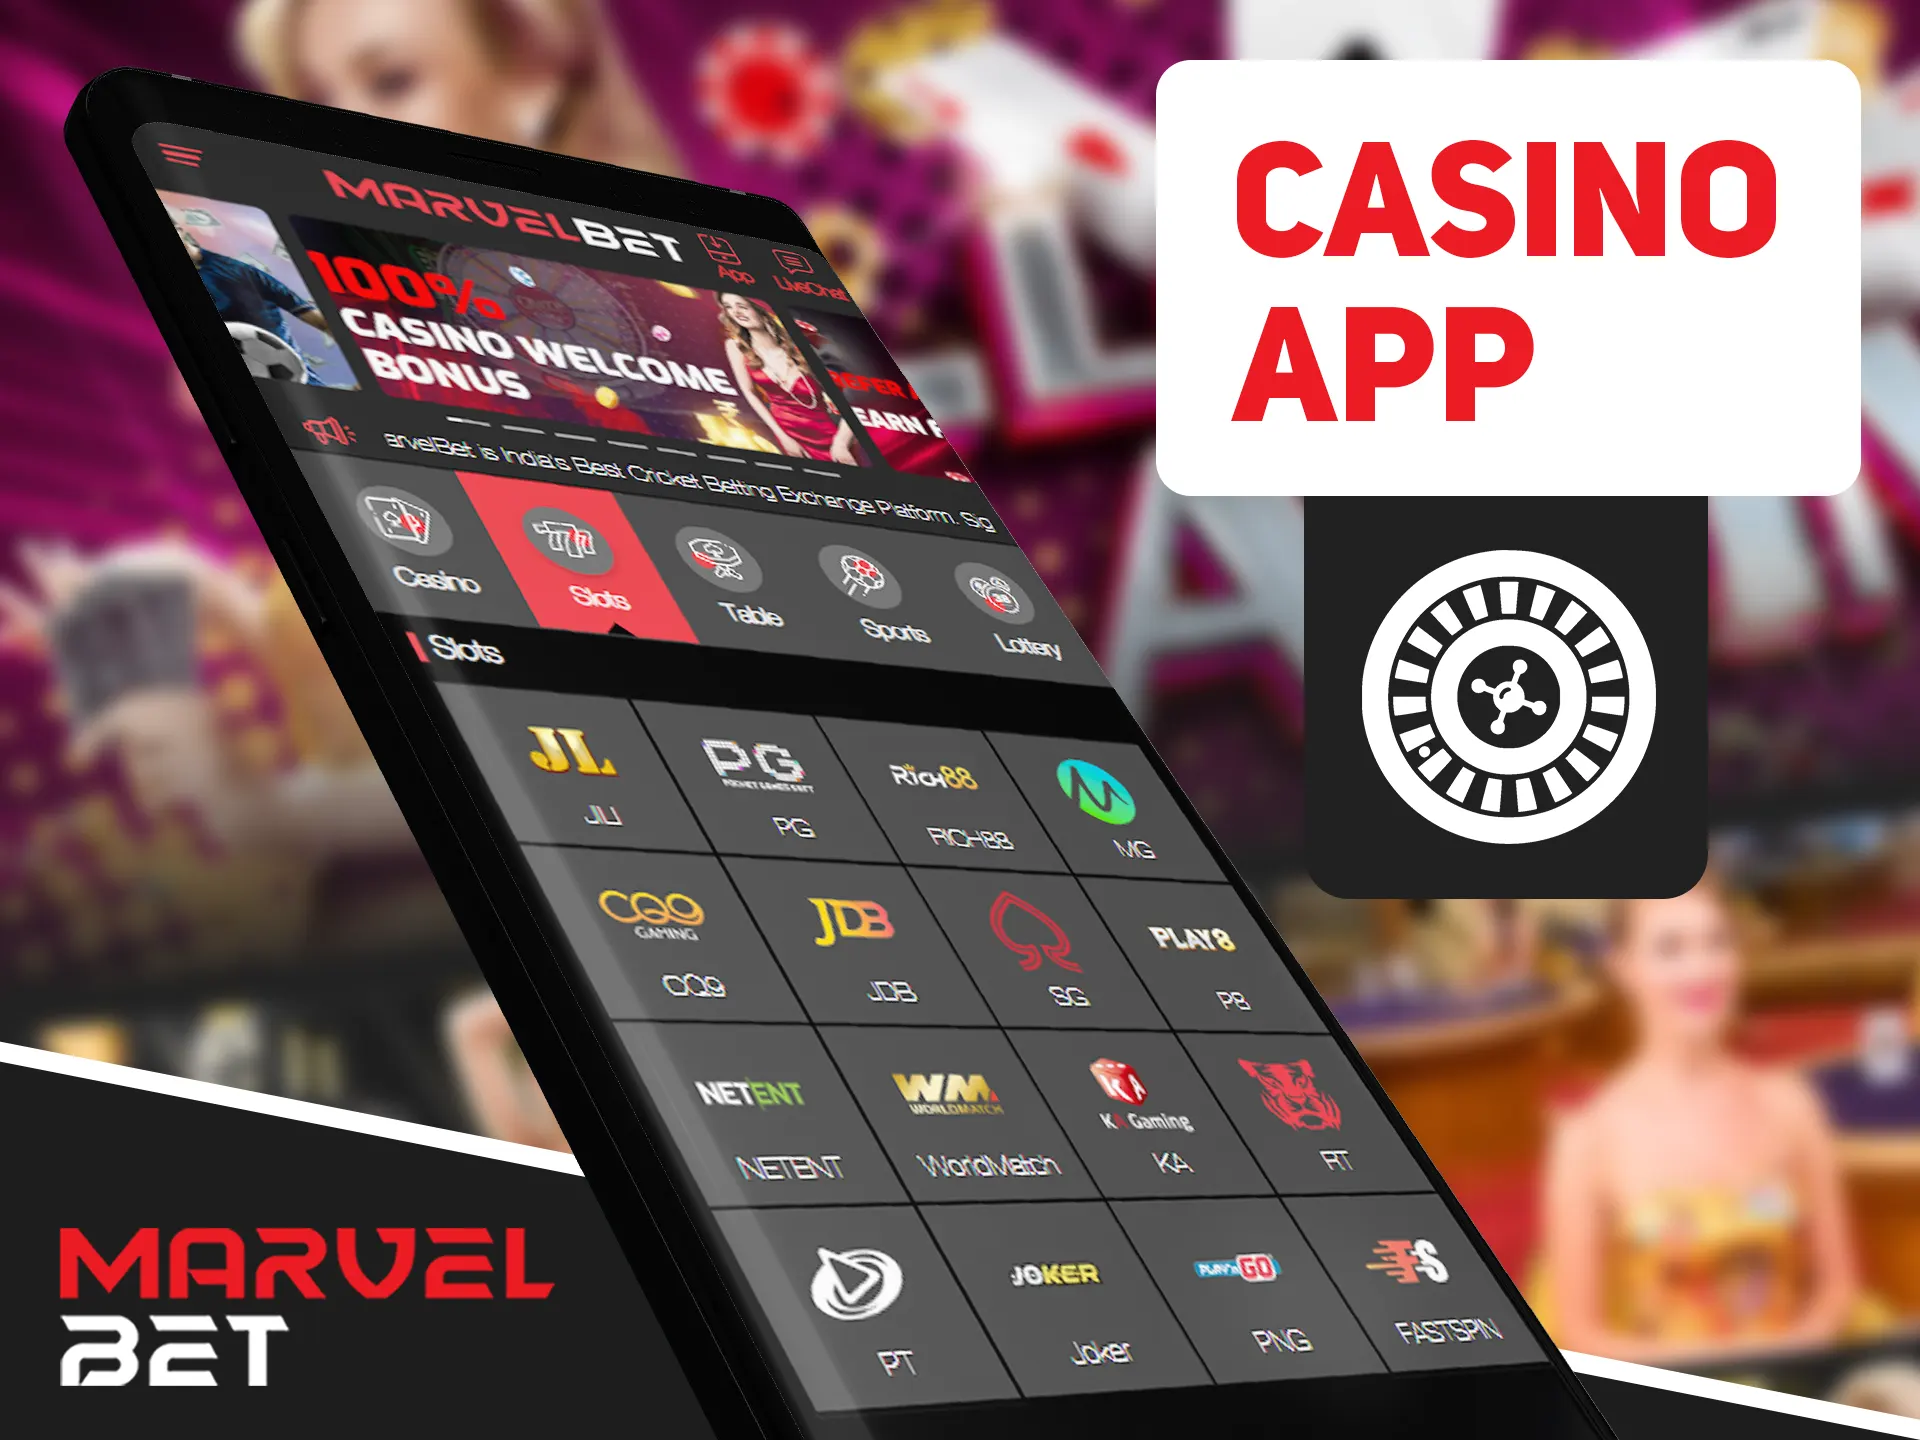 Play various types of casino games using Marvelbet app.